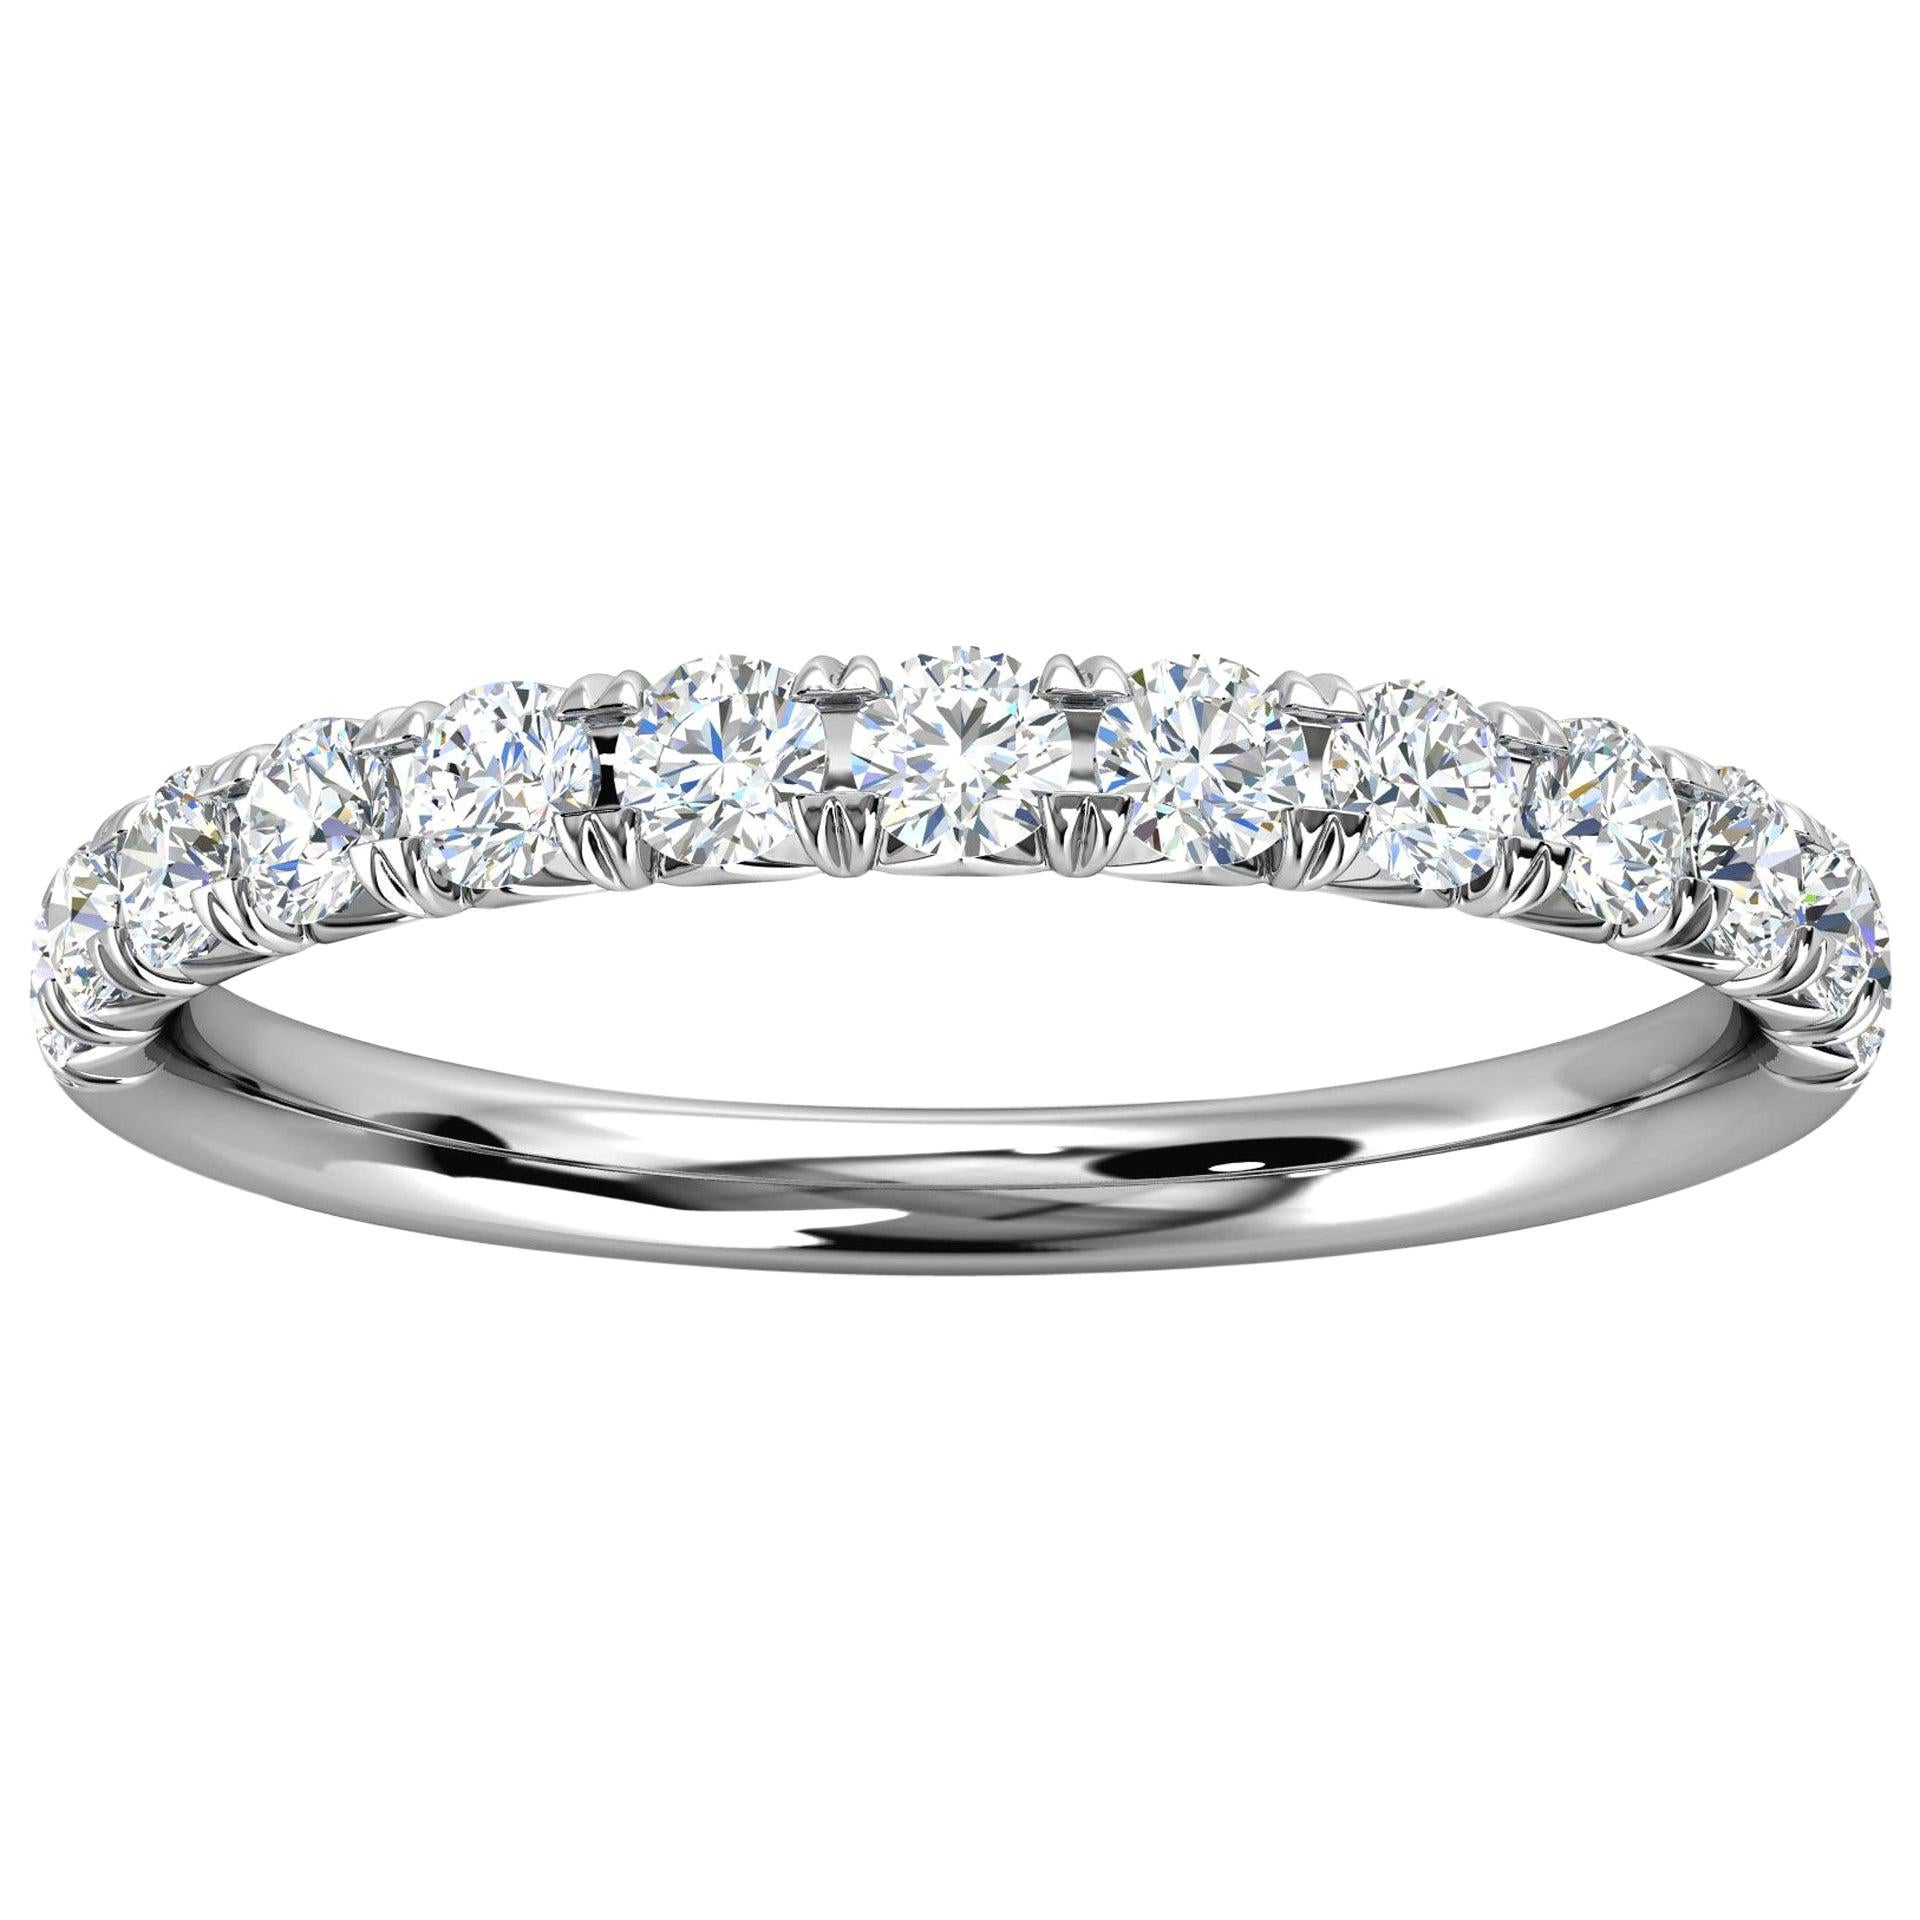 For Sale:  Platinum Voyage French Pave Diamond Ring '1/3 Ct. tw'